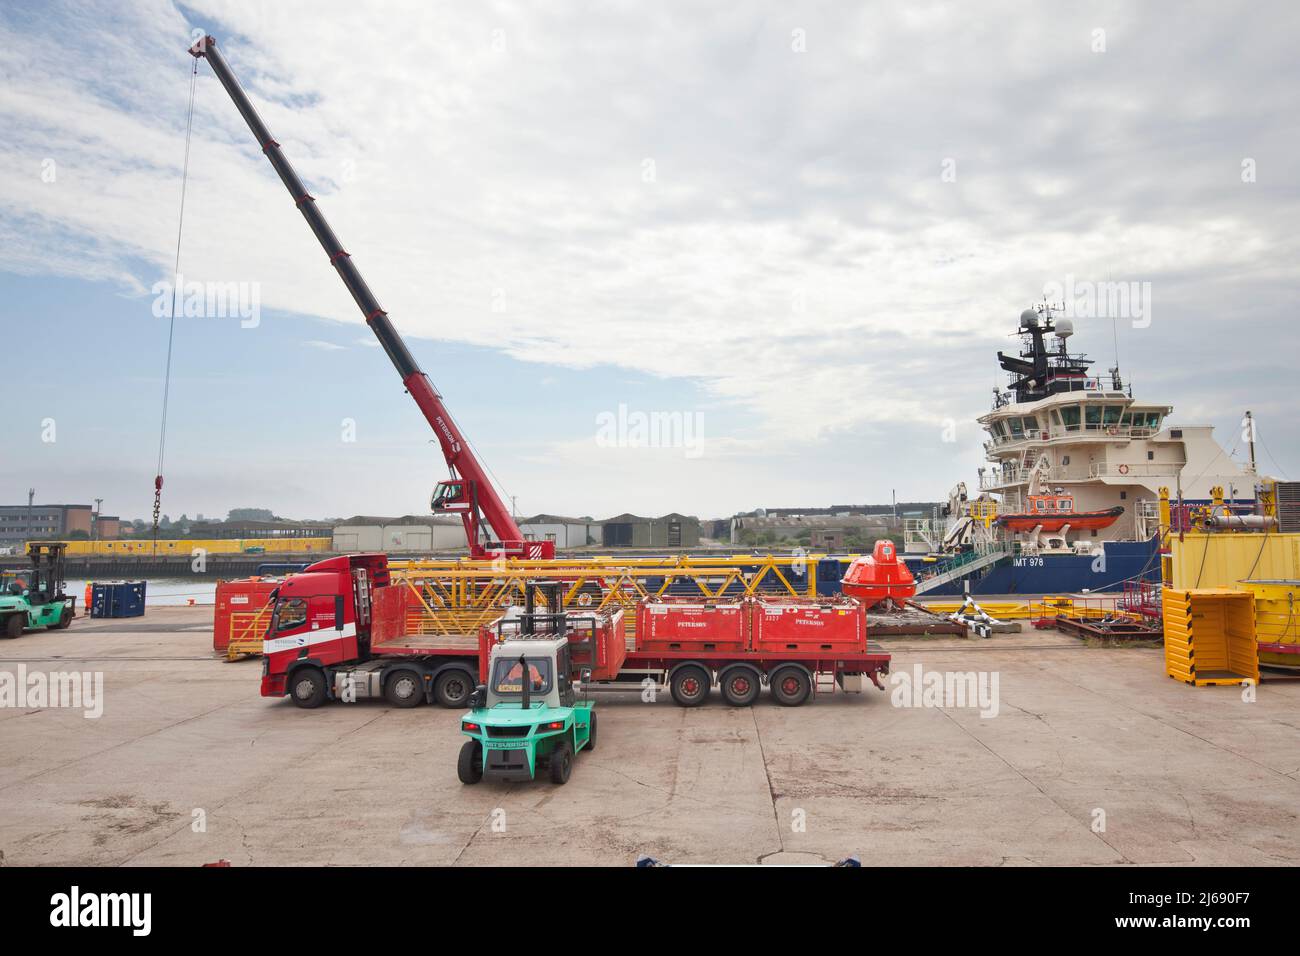 Loading and unloading of North Sea supply vessel, using 5 and 10 tonne Mitsubishi forklifts on Peterson's quay at Lowestoft. Stock Photo